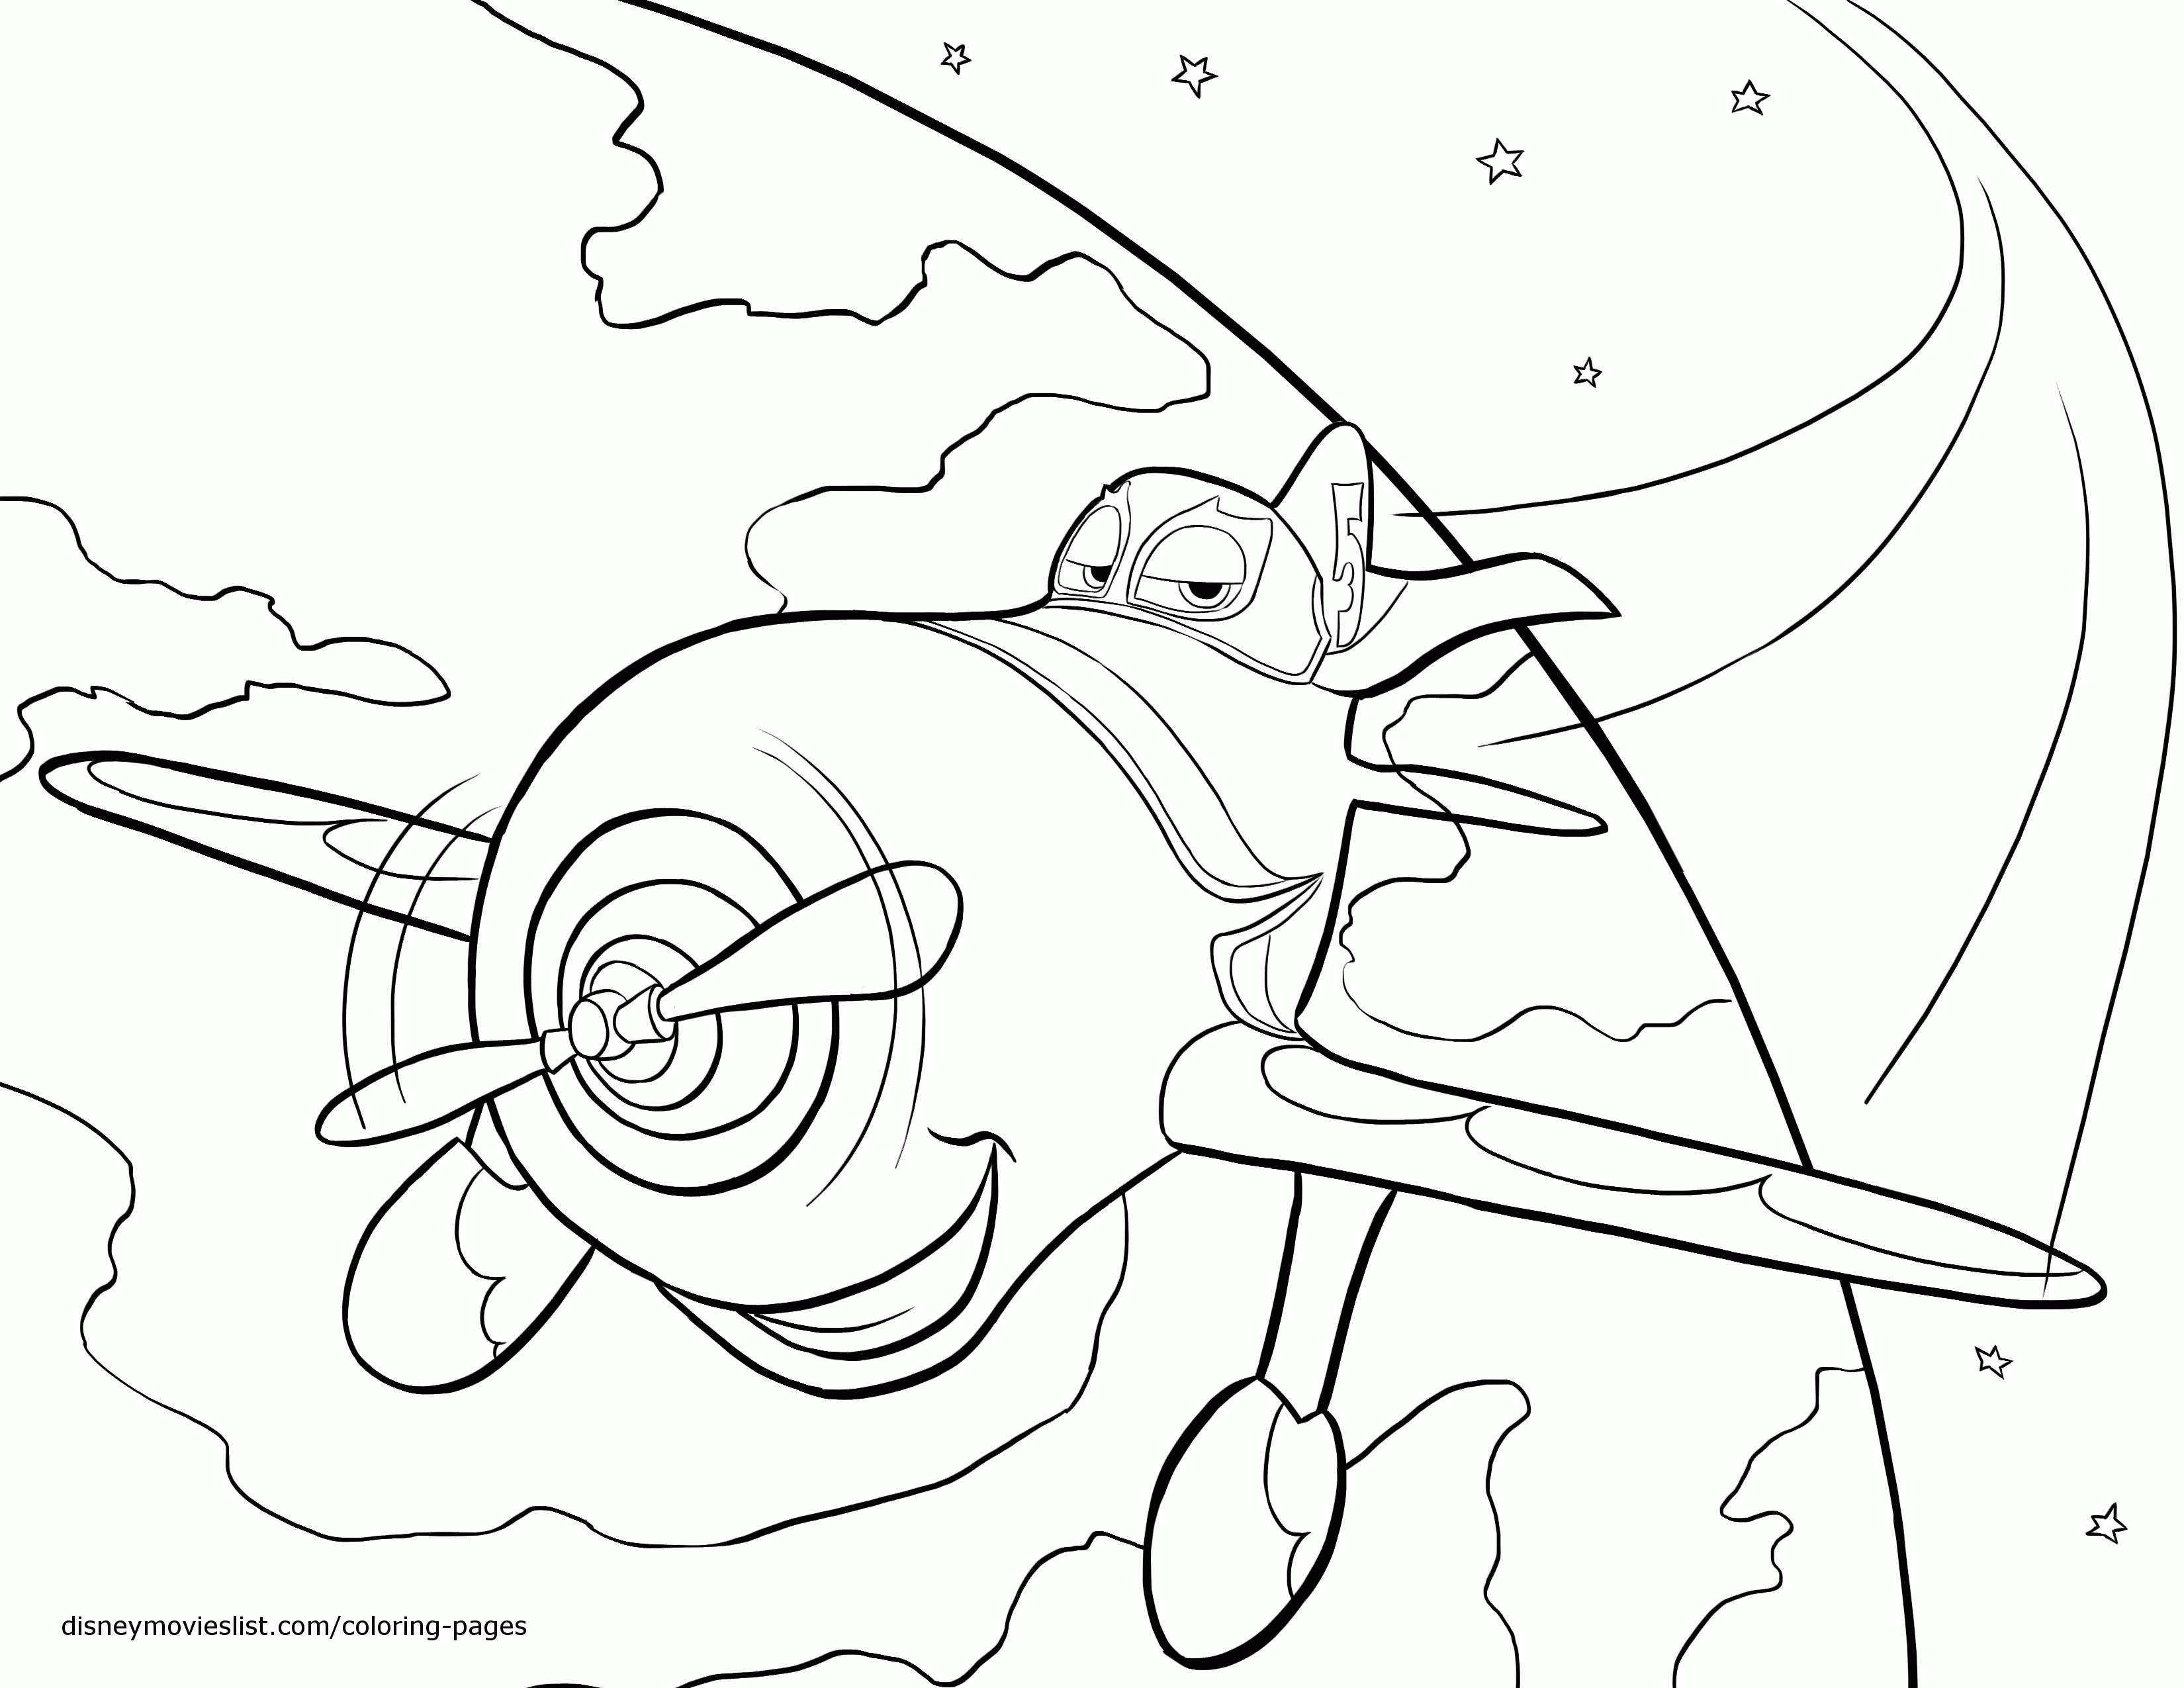 Disney Movie   Coloring Pages For Kids And For Adults   Coloring Home